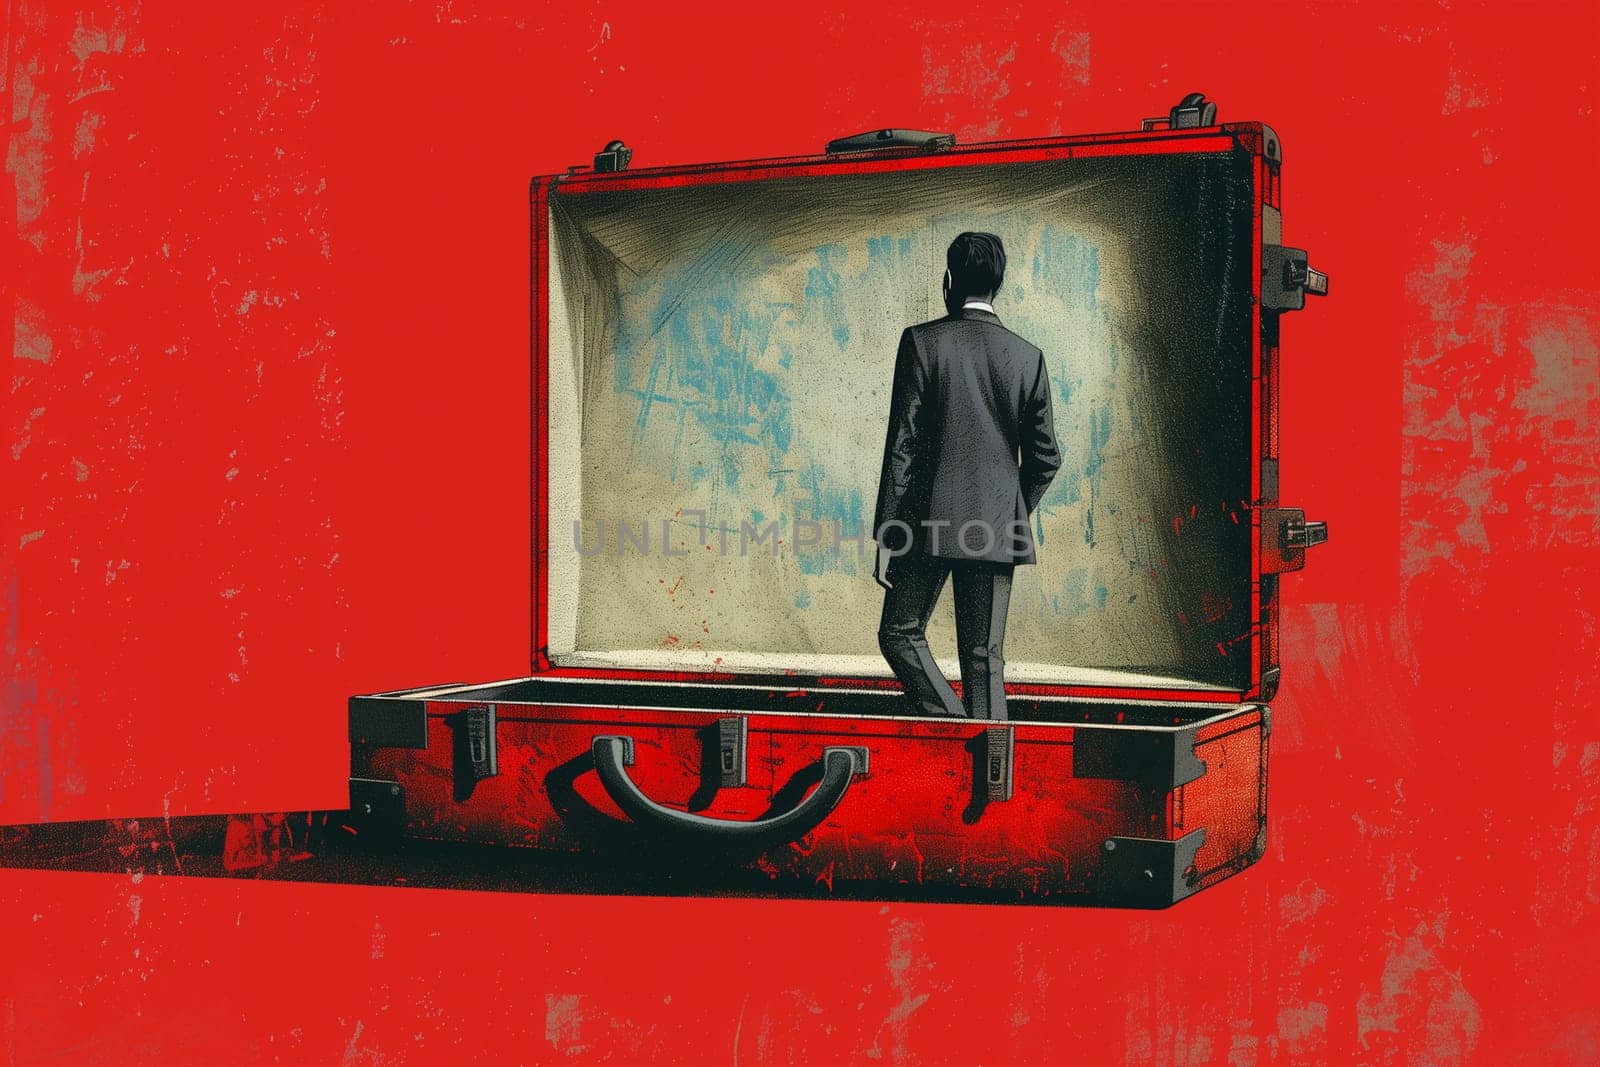 Man Standing Inside a Giant Briefcase Against a Red Background by Sd28DimoN_1976